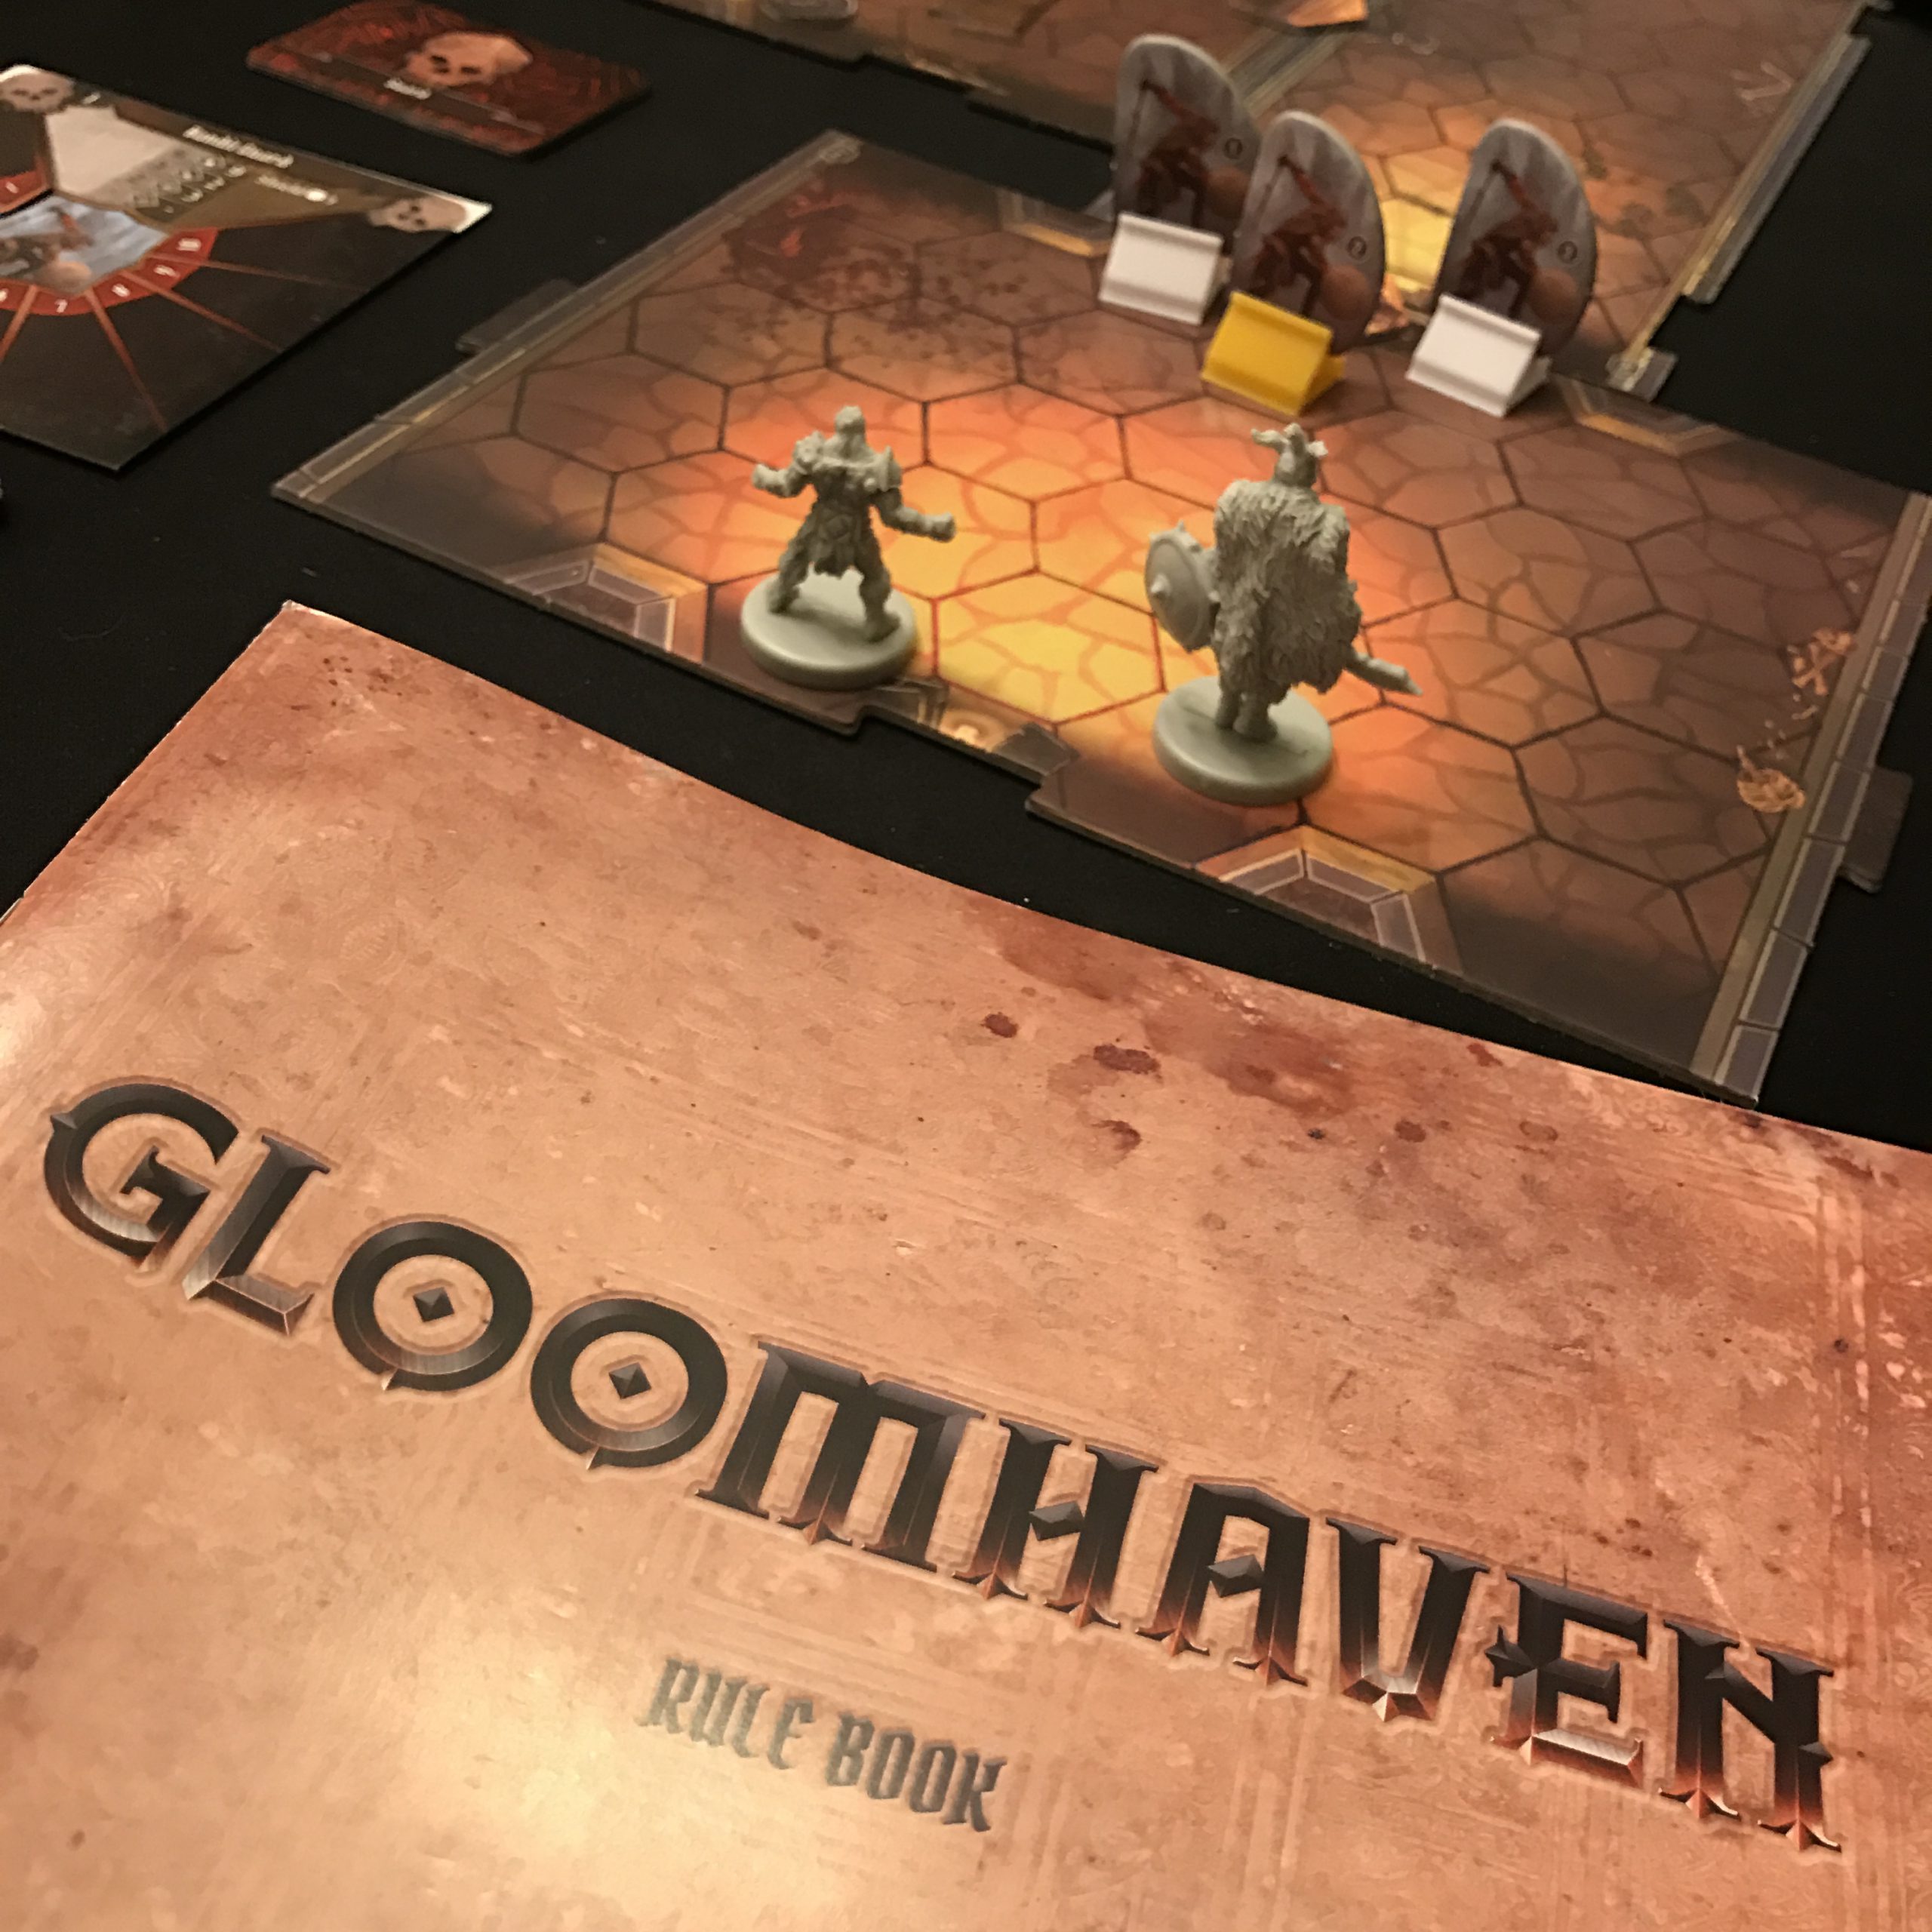 Gloomhaven review - Tabletop Gaming